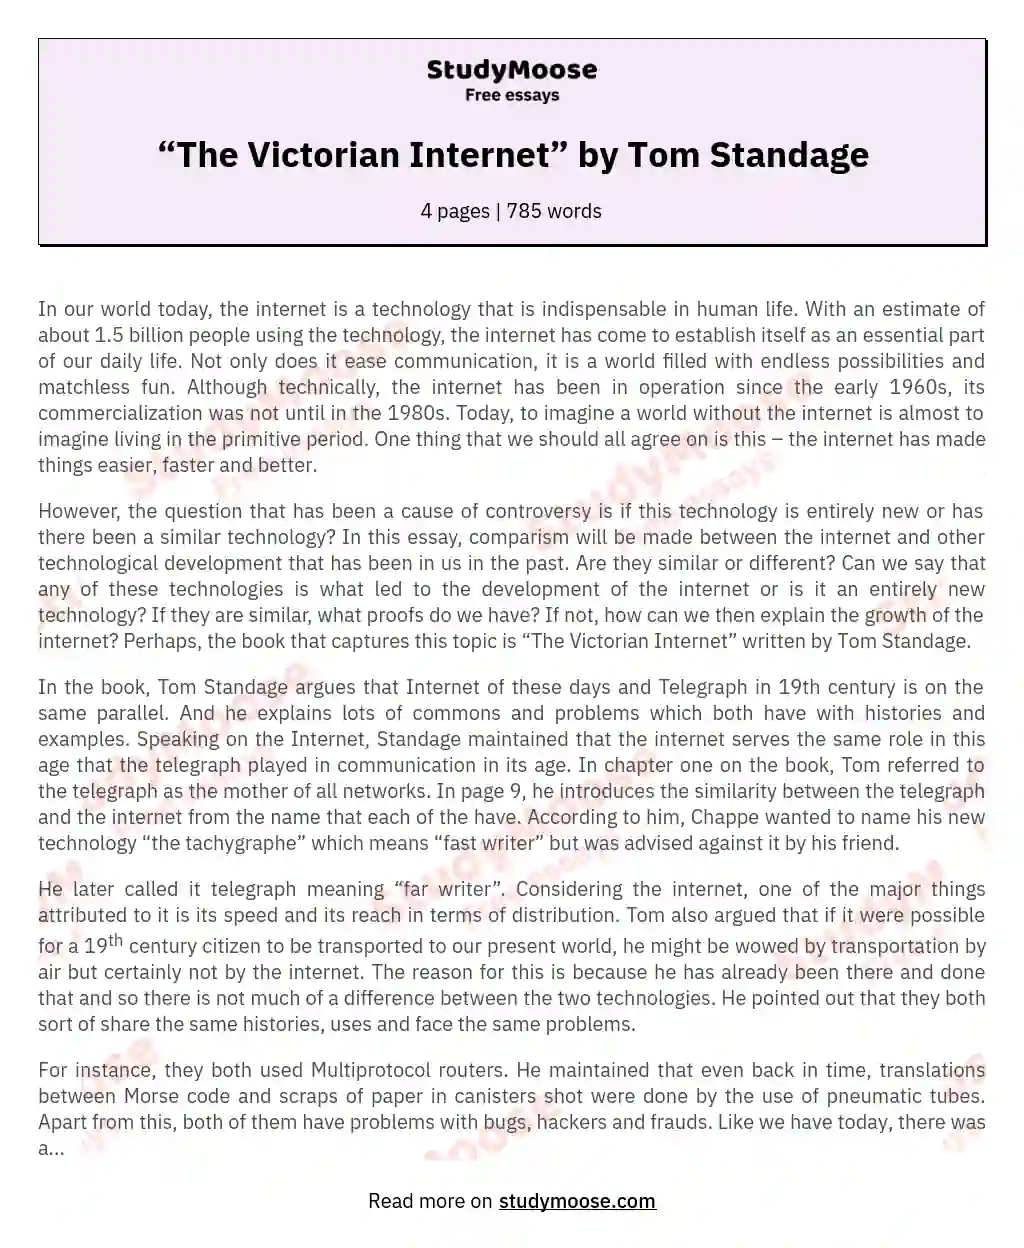 “The Victorian Internet” by Tom Standage essay